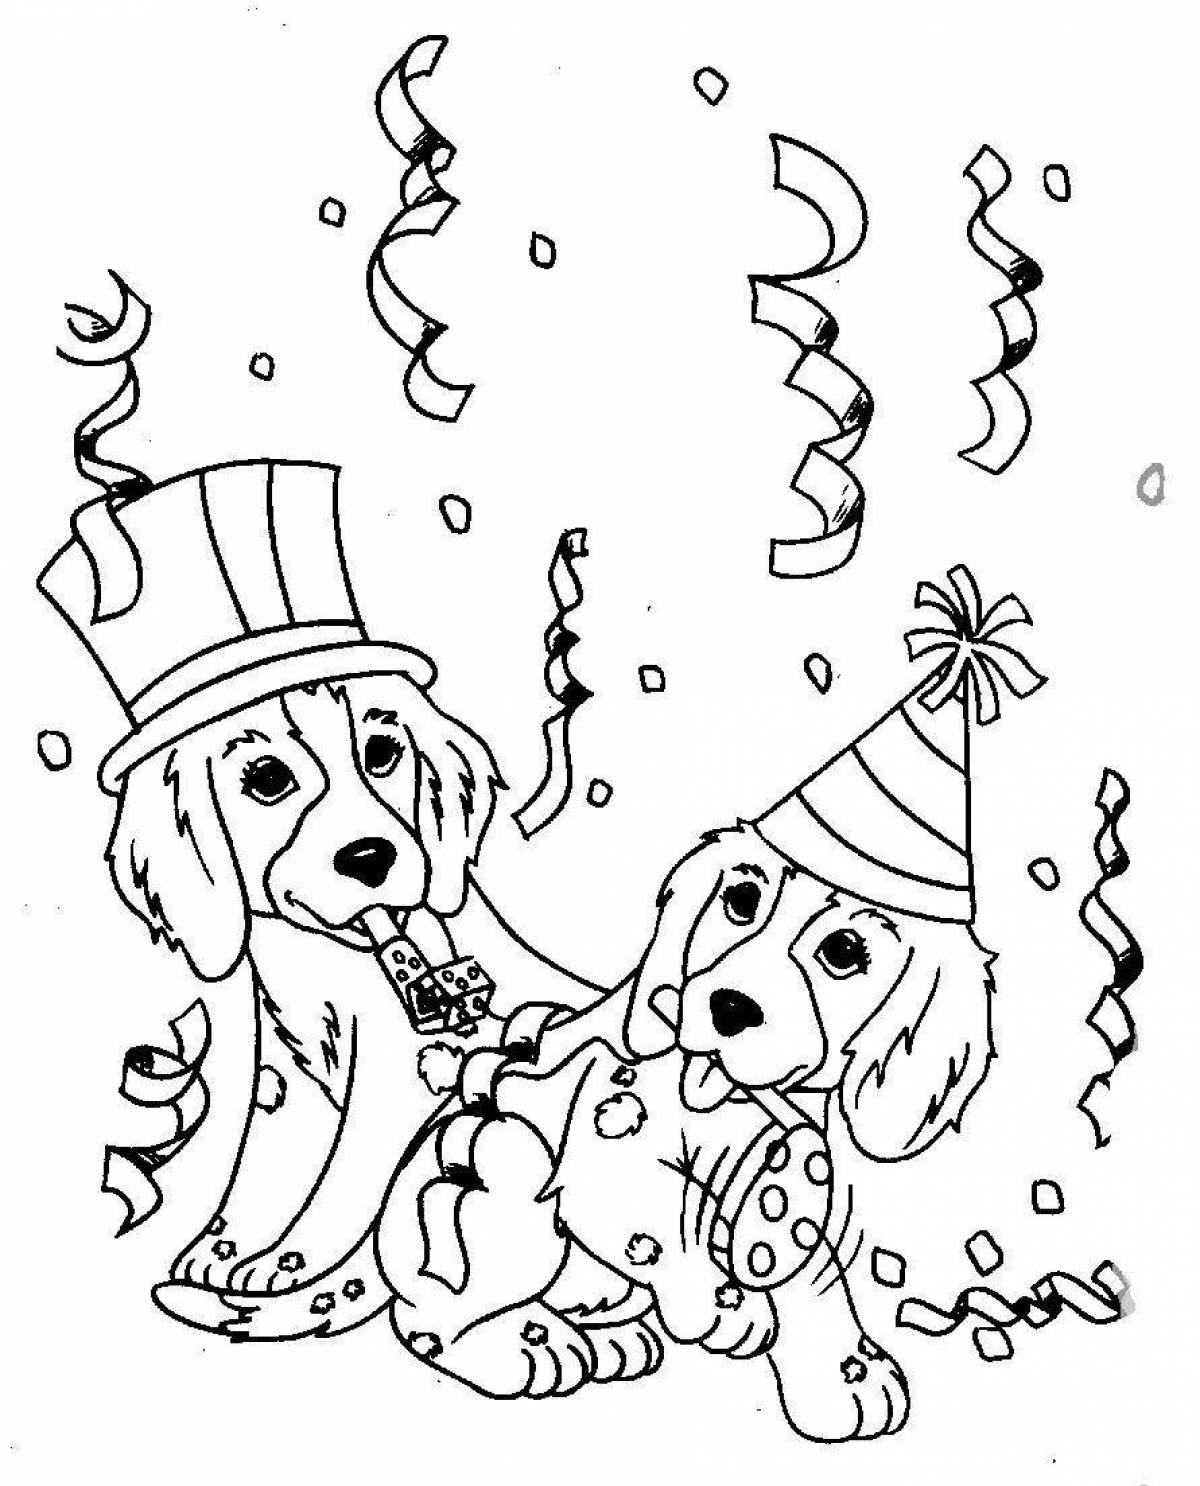 Coloring book glowing Christmas dog